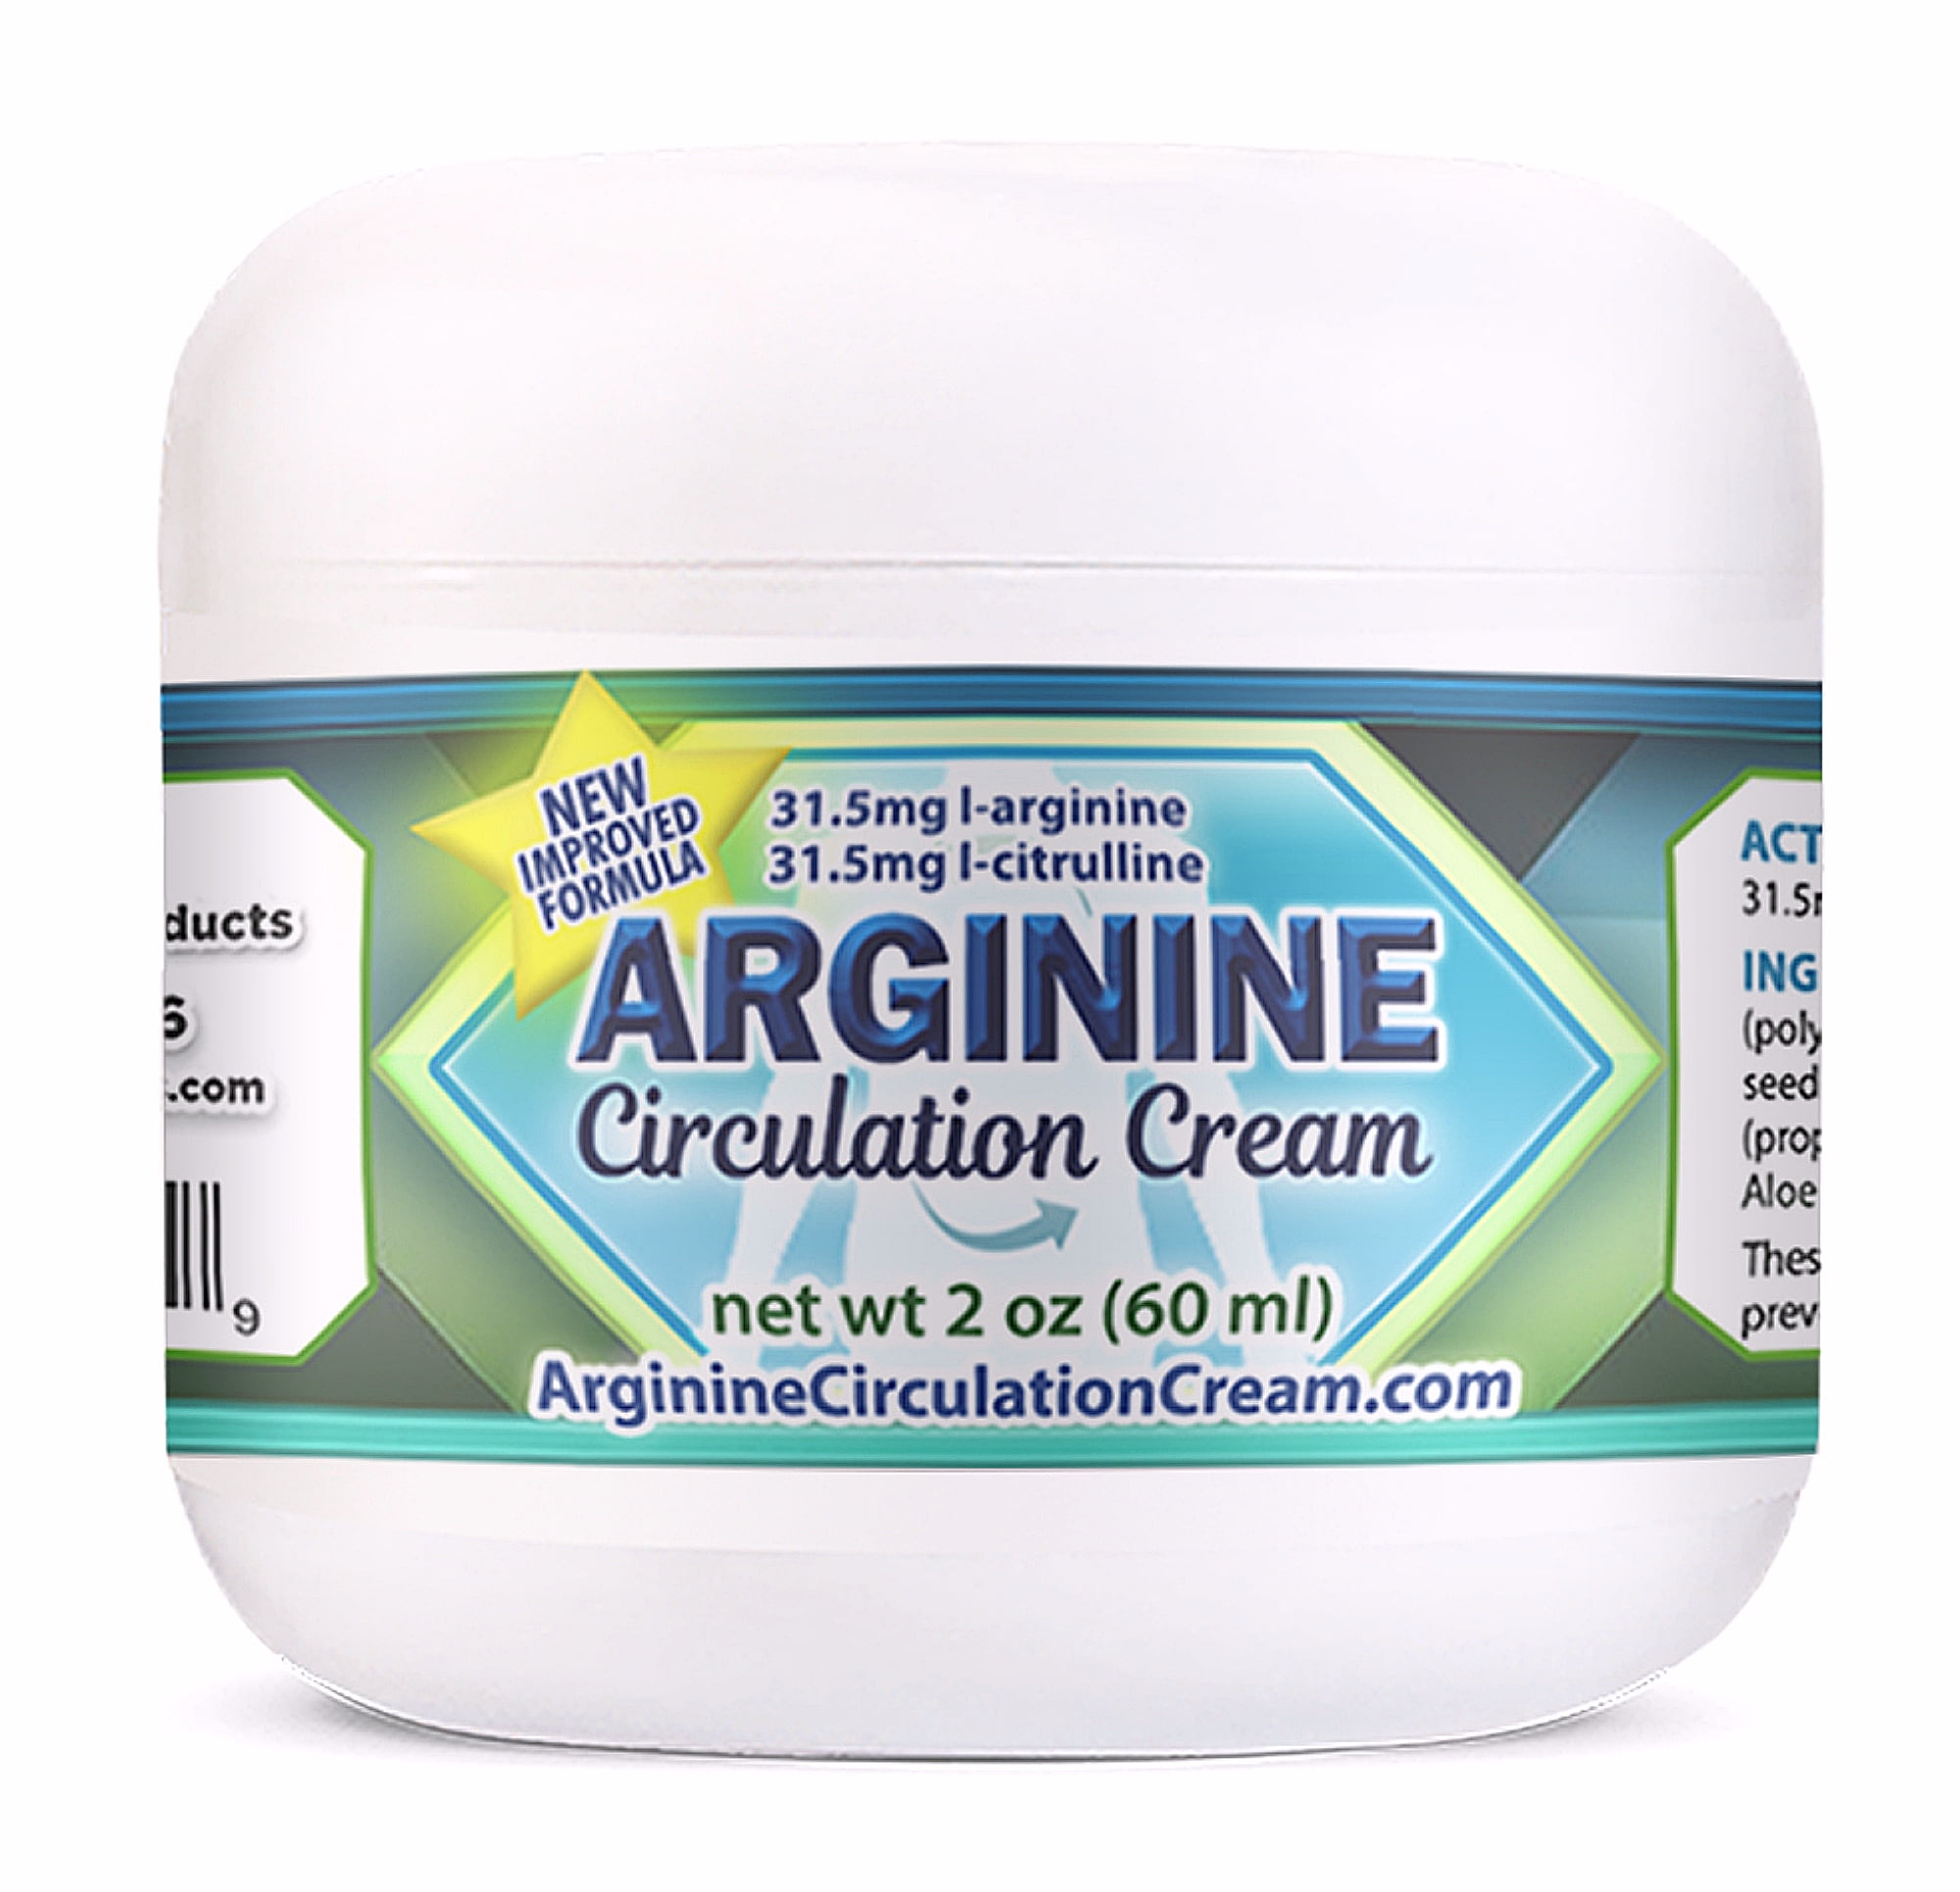 Arginine Circulation Cream - Blood Circulation Supplement with L arginine and Menthol - Supports Improved Blood Flow to Cold Hands and Cold Feet - Relieves Neuropathy Pain (2 Ounce)